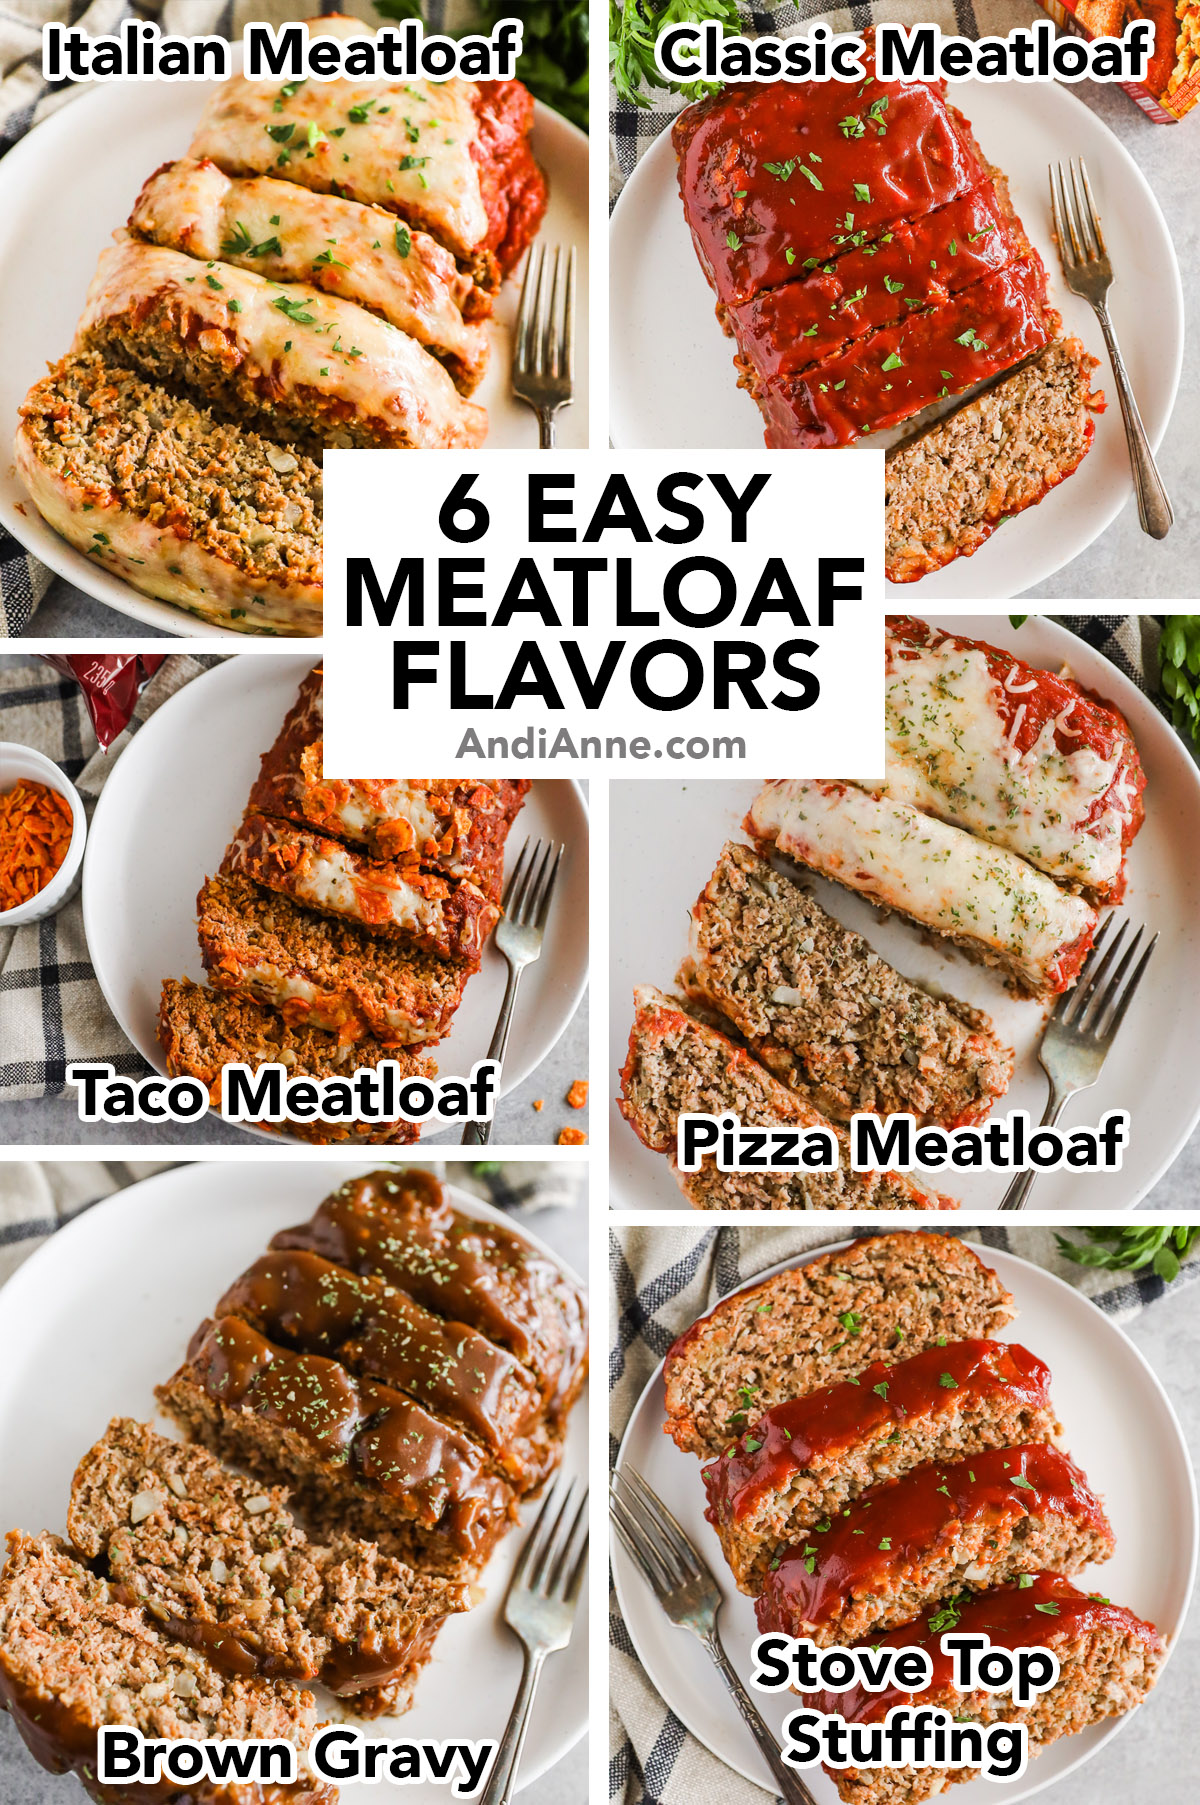 Images of six meatloaf flavors grouped together, all on white plates and slices into servings. Recipes include italian flavor, classic, taco, pizza, brown gravy, and stuffing flavor.